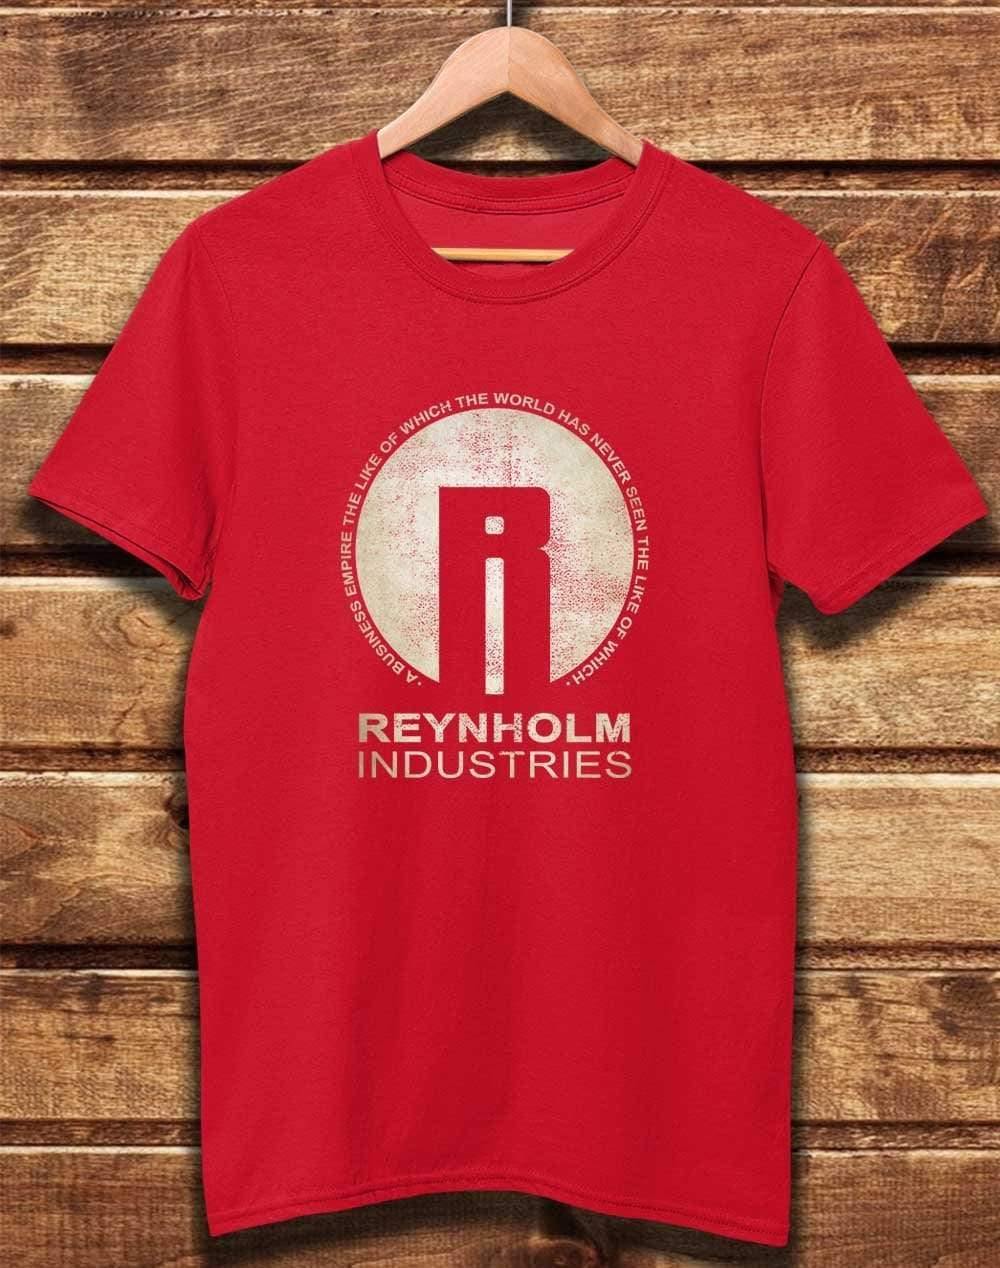 DELUXE Reynholm Industries Organic Cotton T-Shirt XS / Red  - Off World Tees